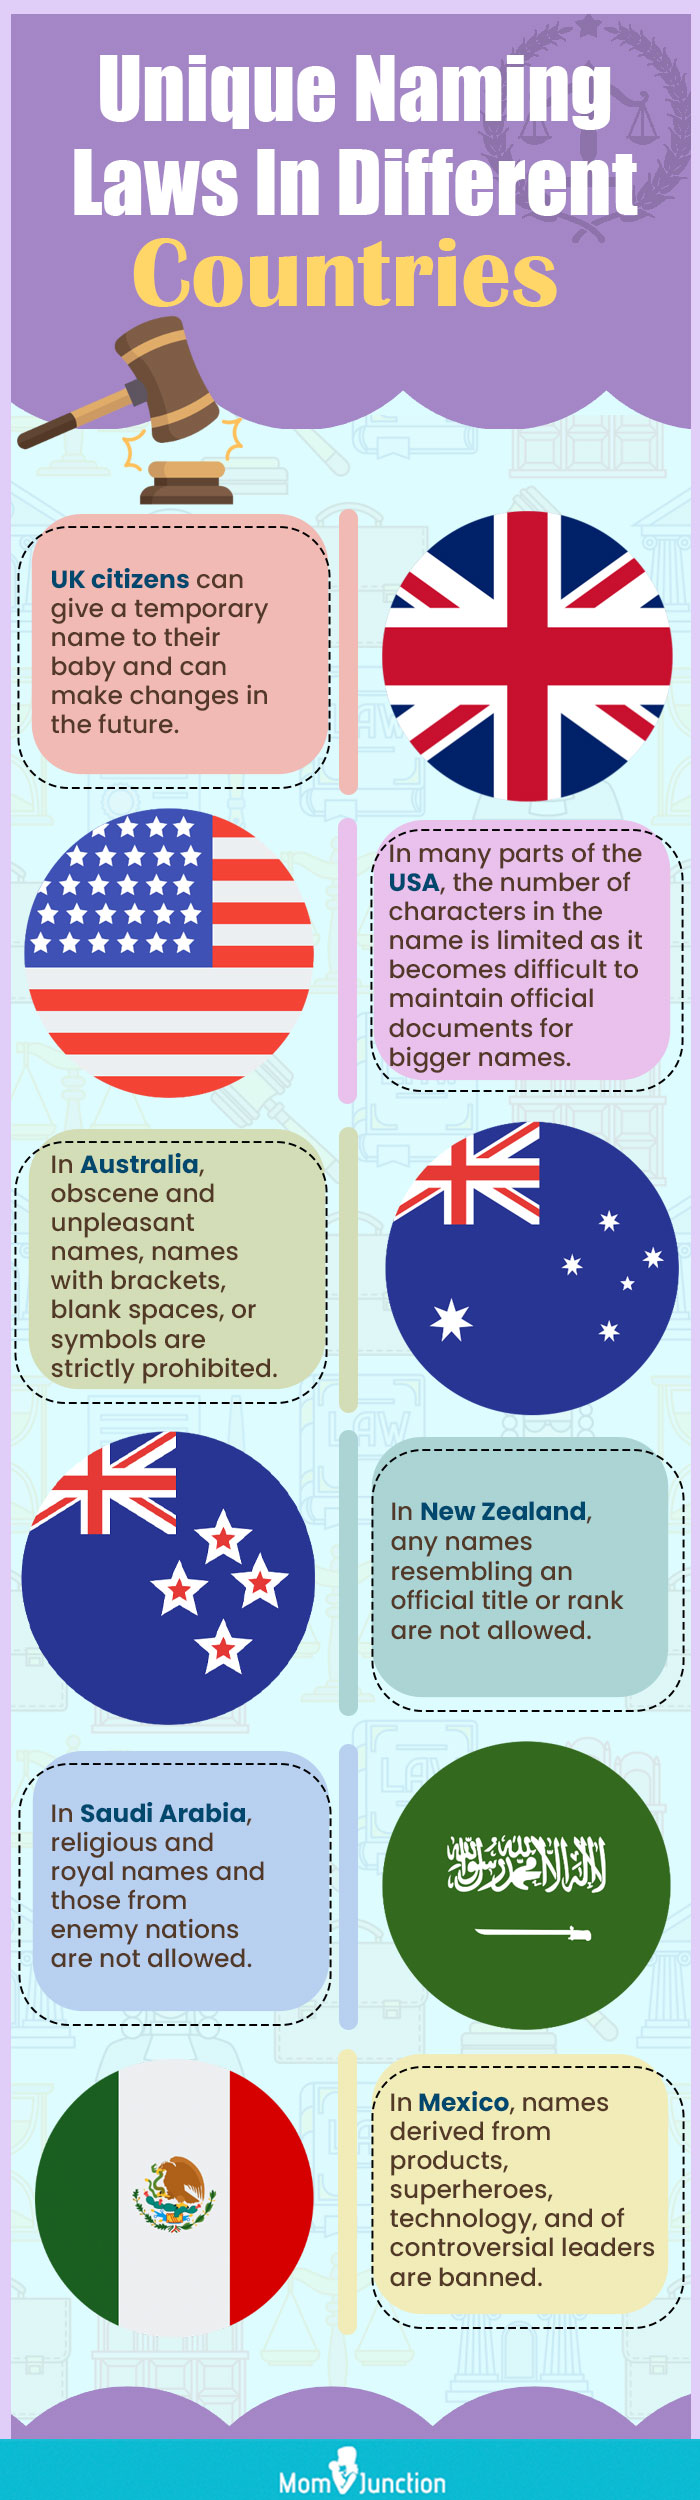 unique naming laws in different countries (infographic)